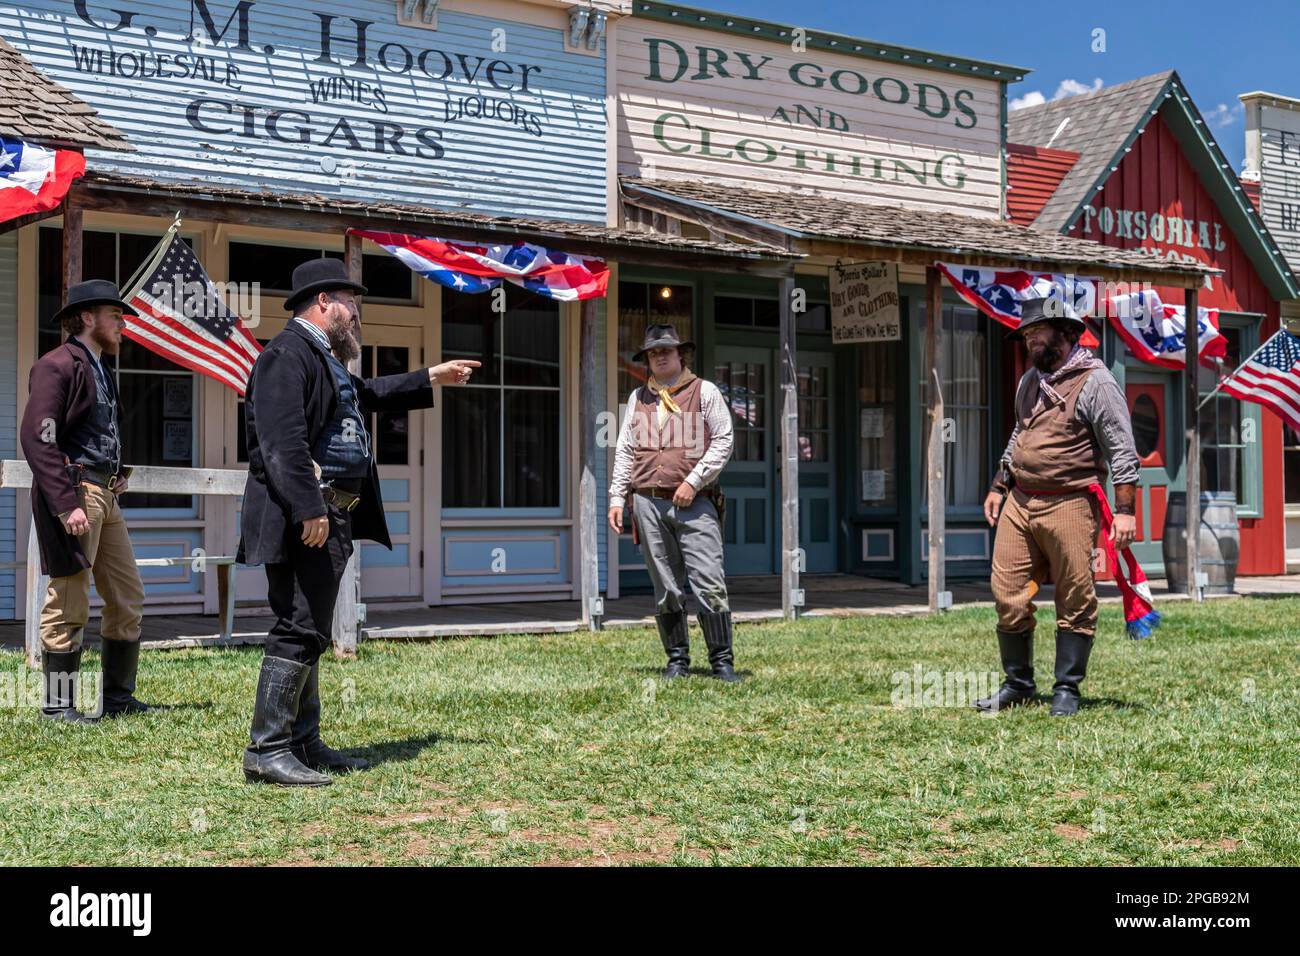 https://c8.alamy.com/comp/2PGB92M/dodge-city-kansas-an-old-fashioned-4th-of-july-at-the-boot-hill-museum-featuring-a-reenactment-of-the-shooting-of-ed-masterson-2PGB92M.jpg